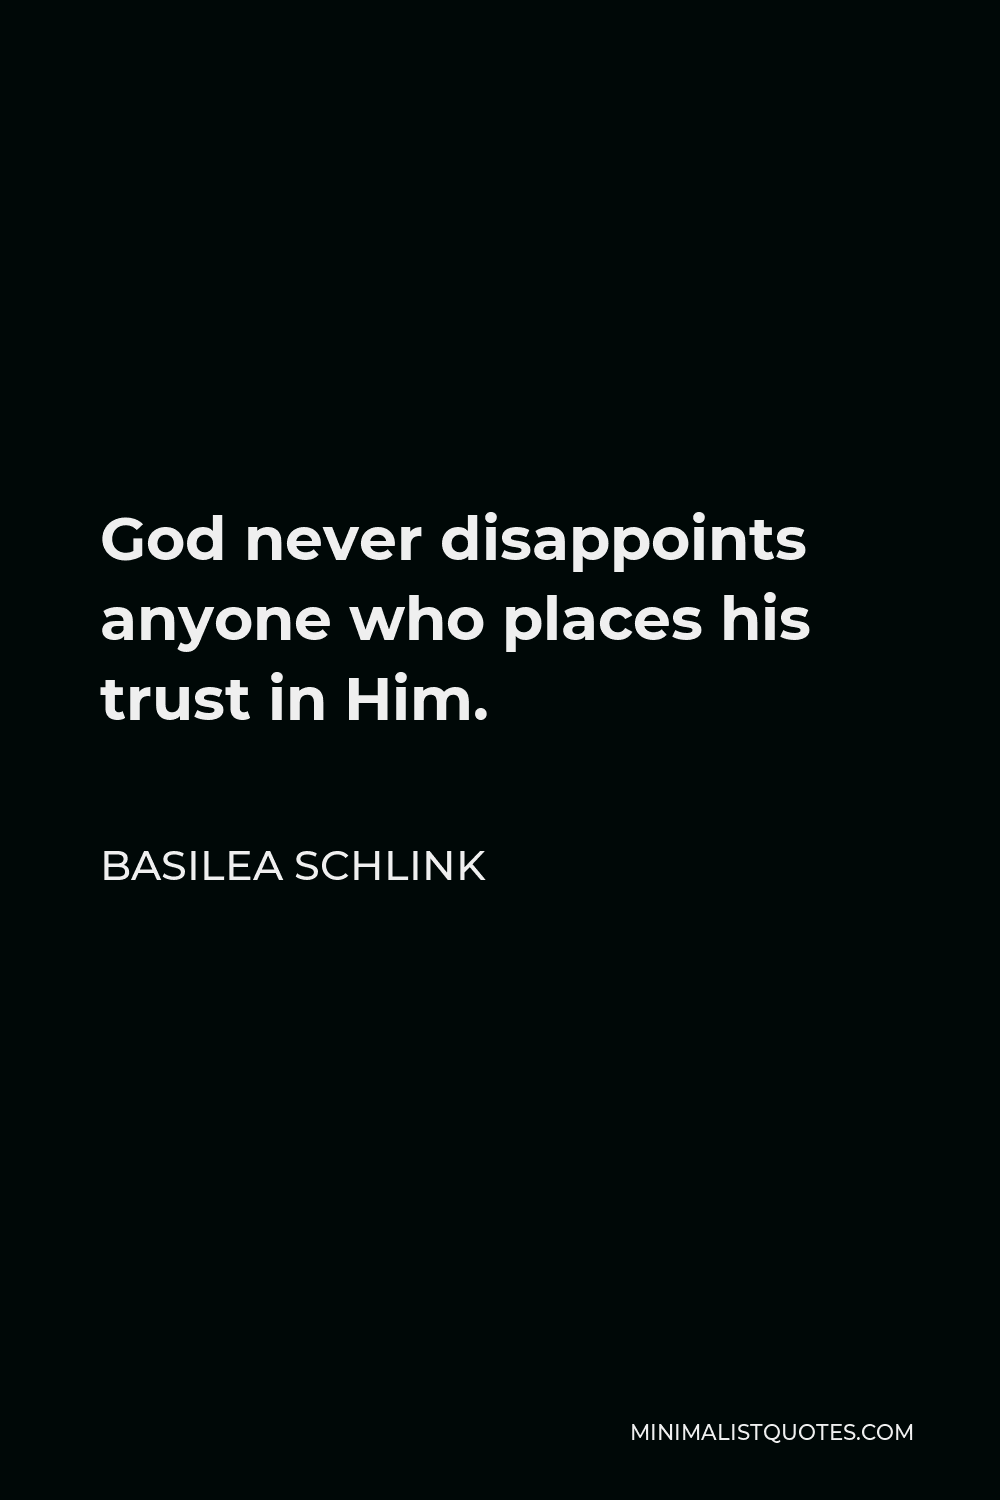 Basilea Schlink Quote - God never disappoints anyone who places his trust in Him.